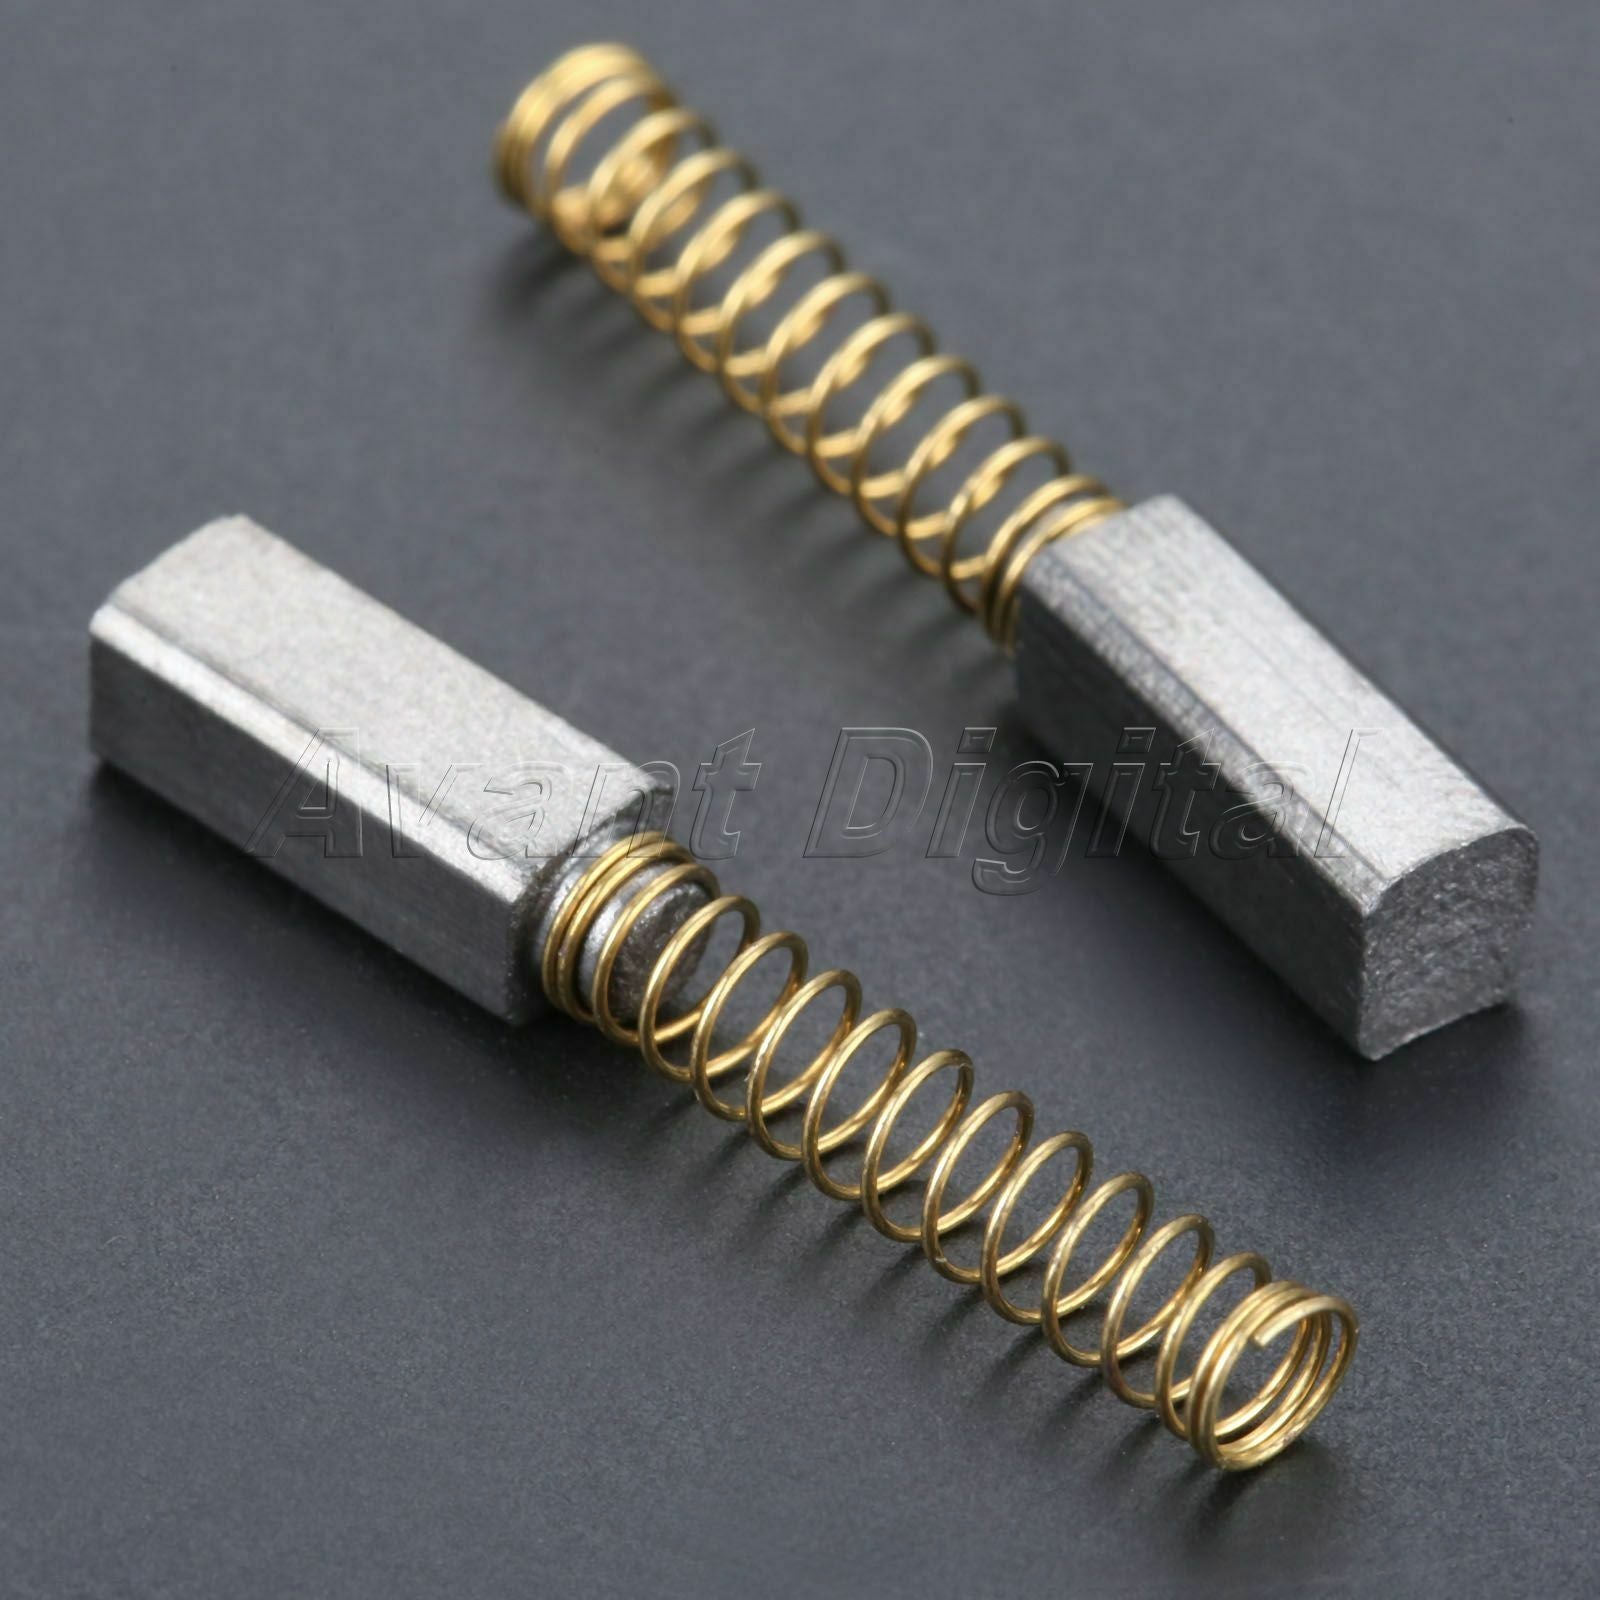 10Pcs Carbon Motor Brushes Graphite & Copper Wire Household Sewing Machine Parts